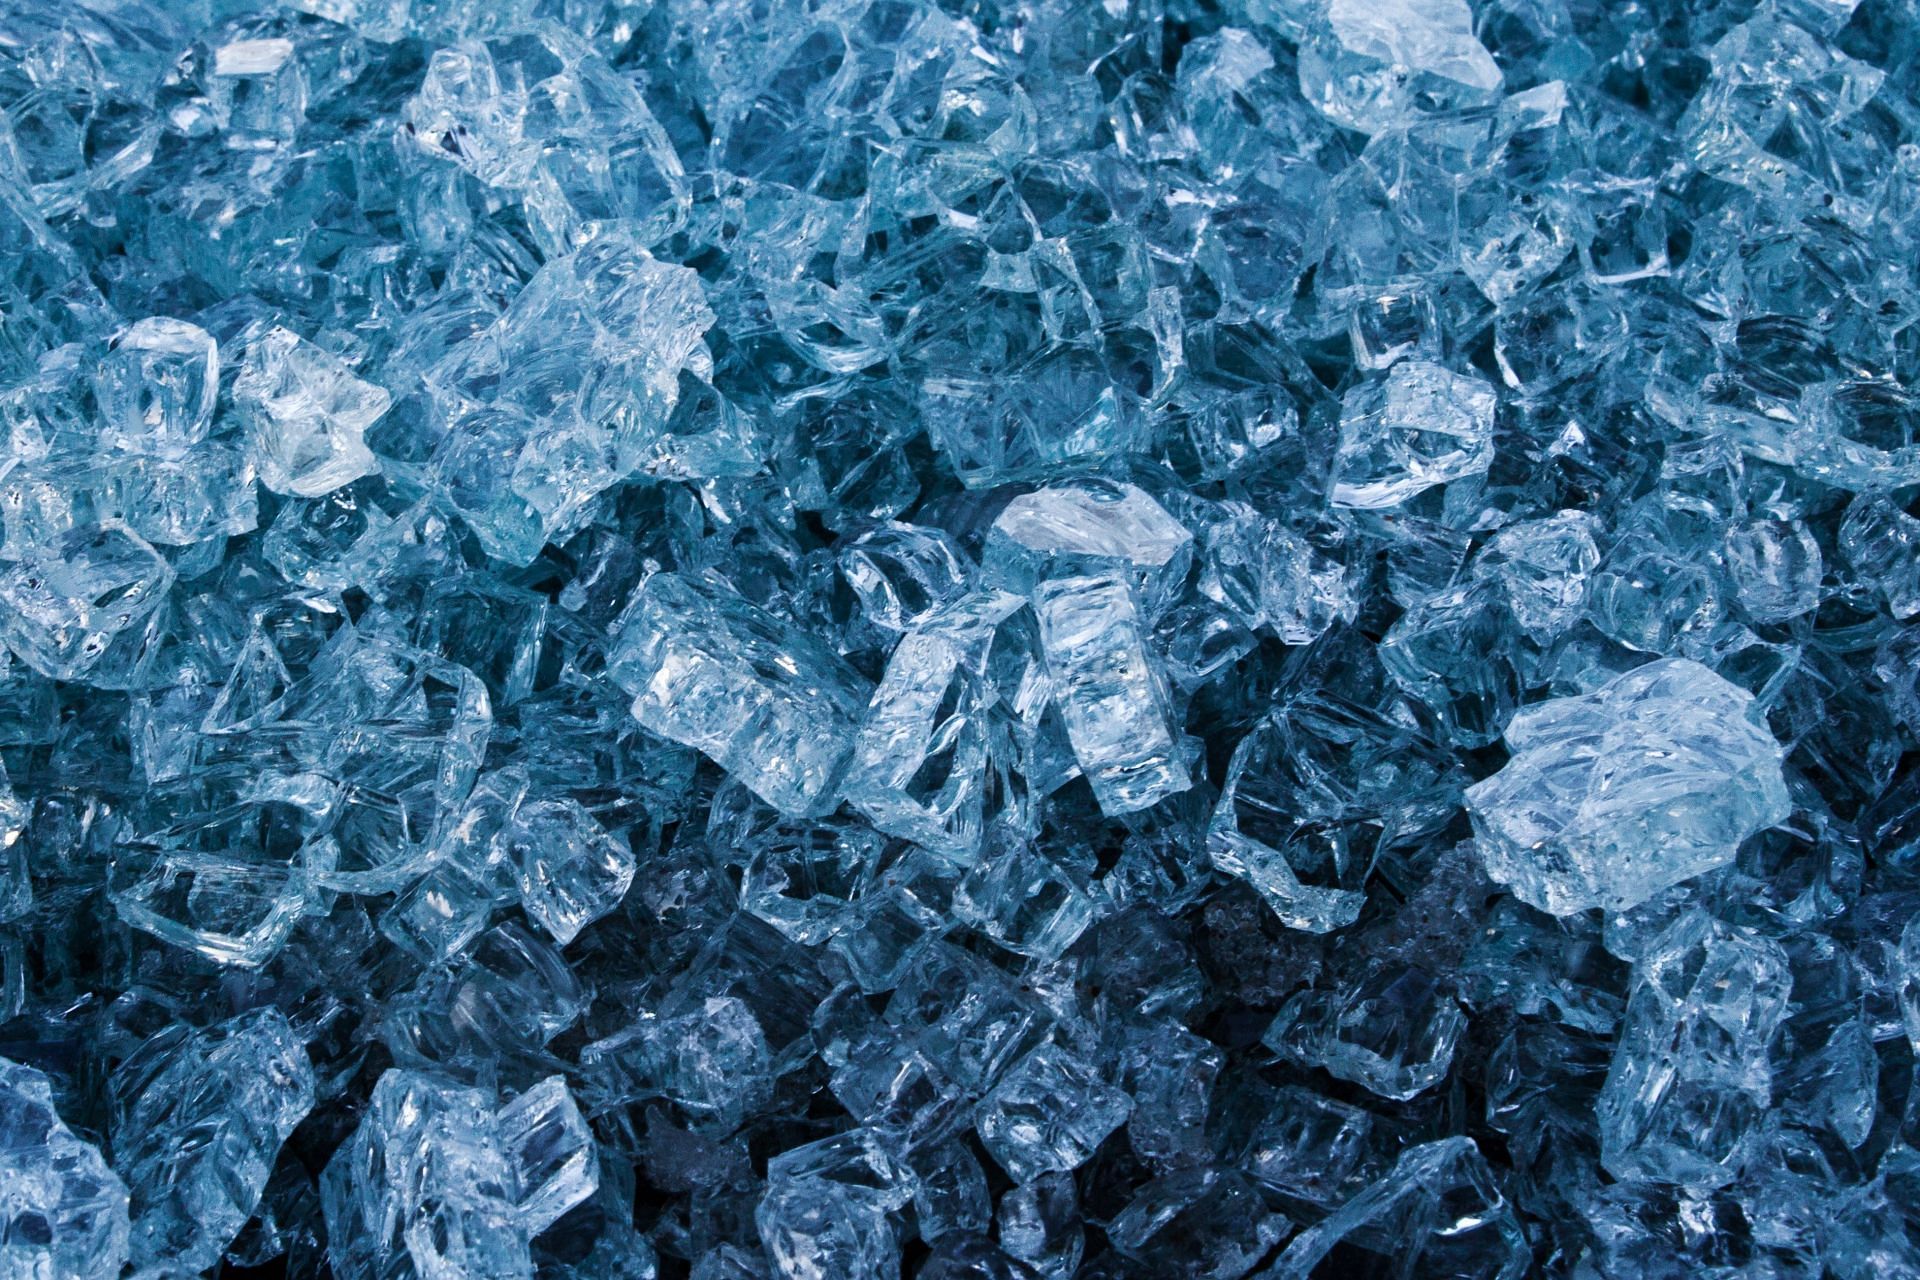 Applying ice pack can help with the muscle soreness. (Image via Unsplash/Scott Rodgerson)